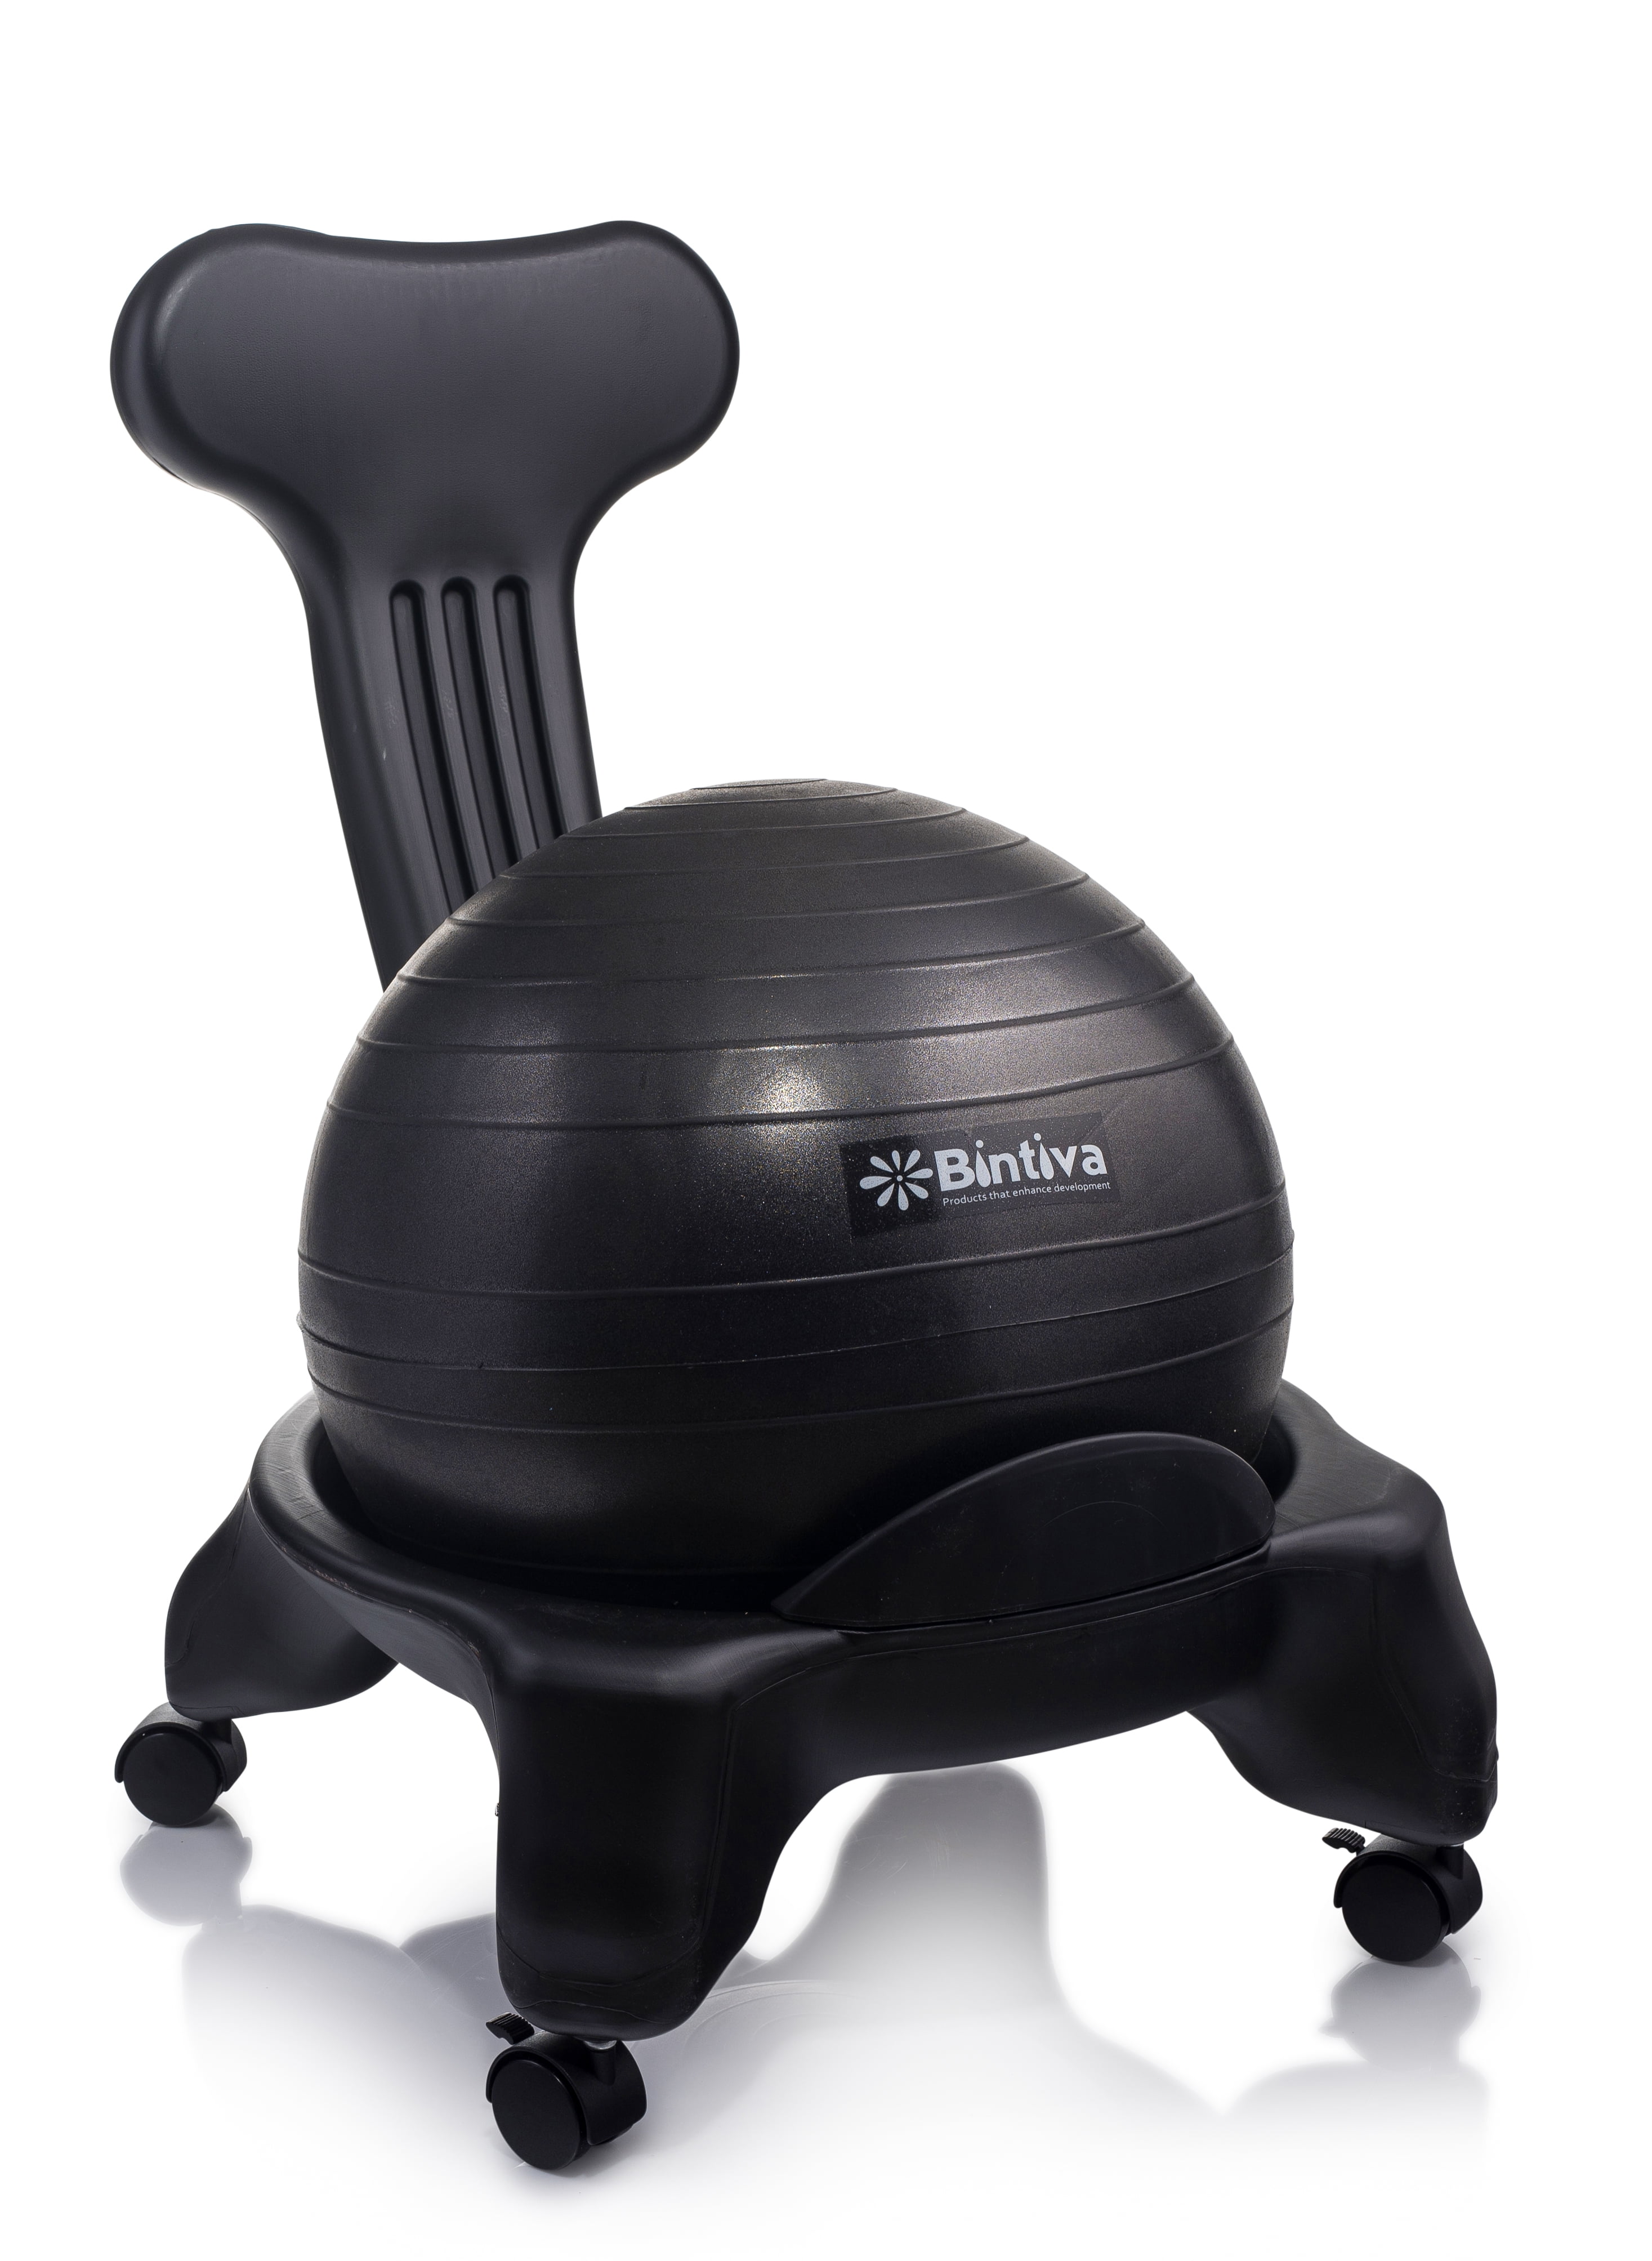 Exercise Ball Chair - For Home and Office Includes Free Pump and Wheels that Lock - Black